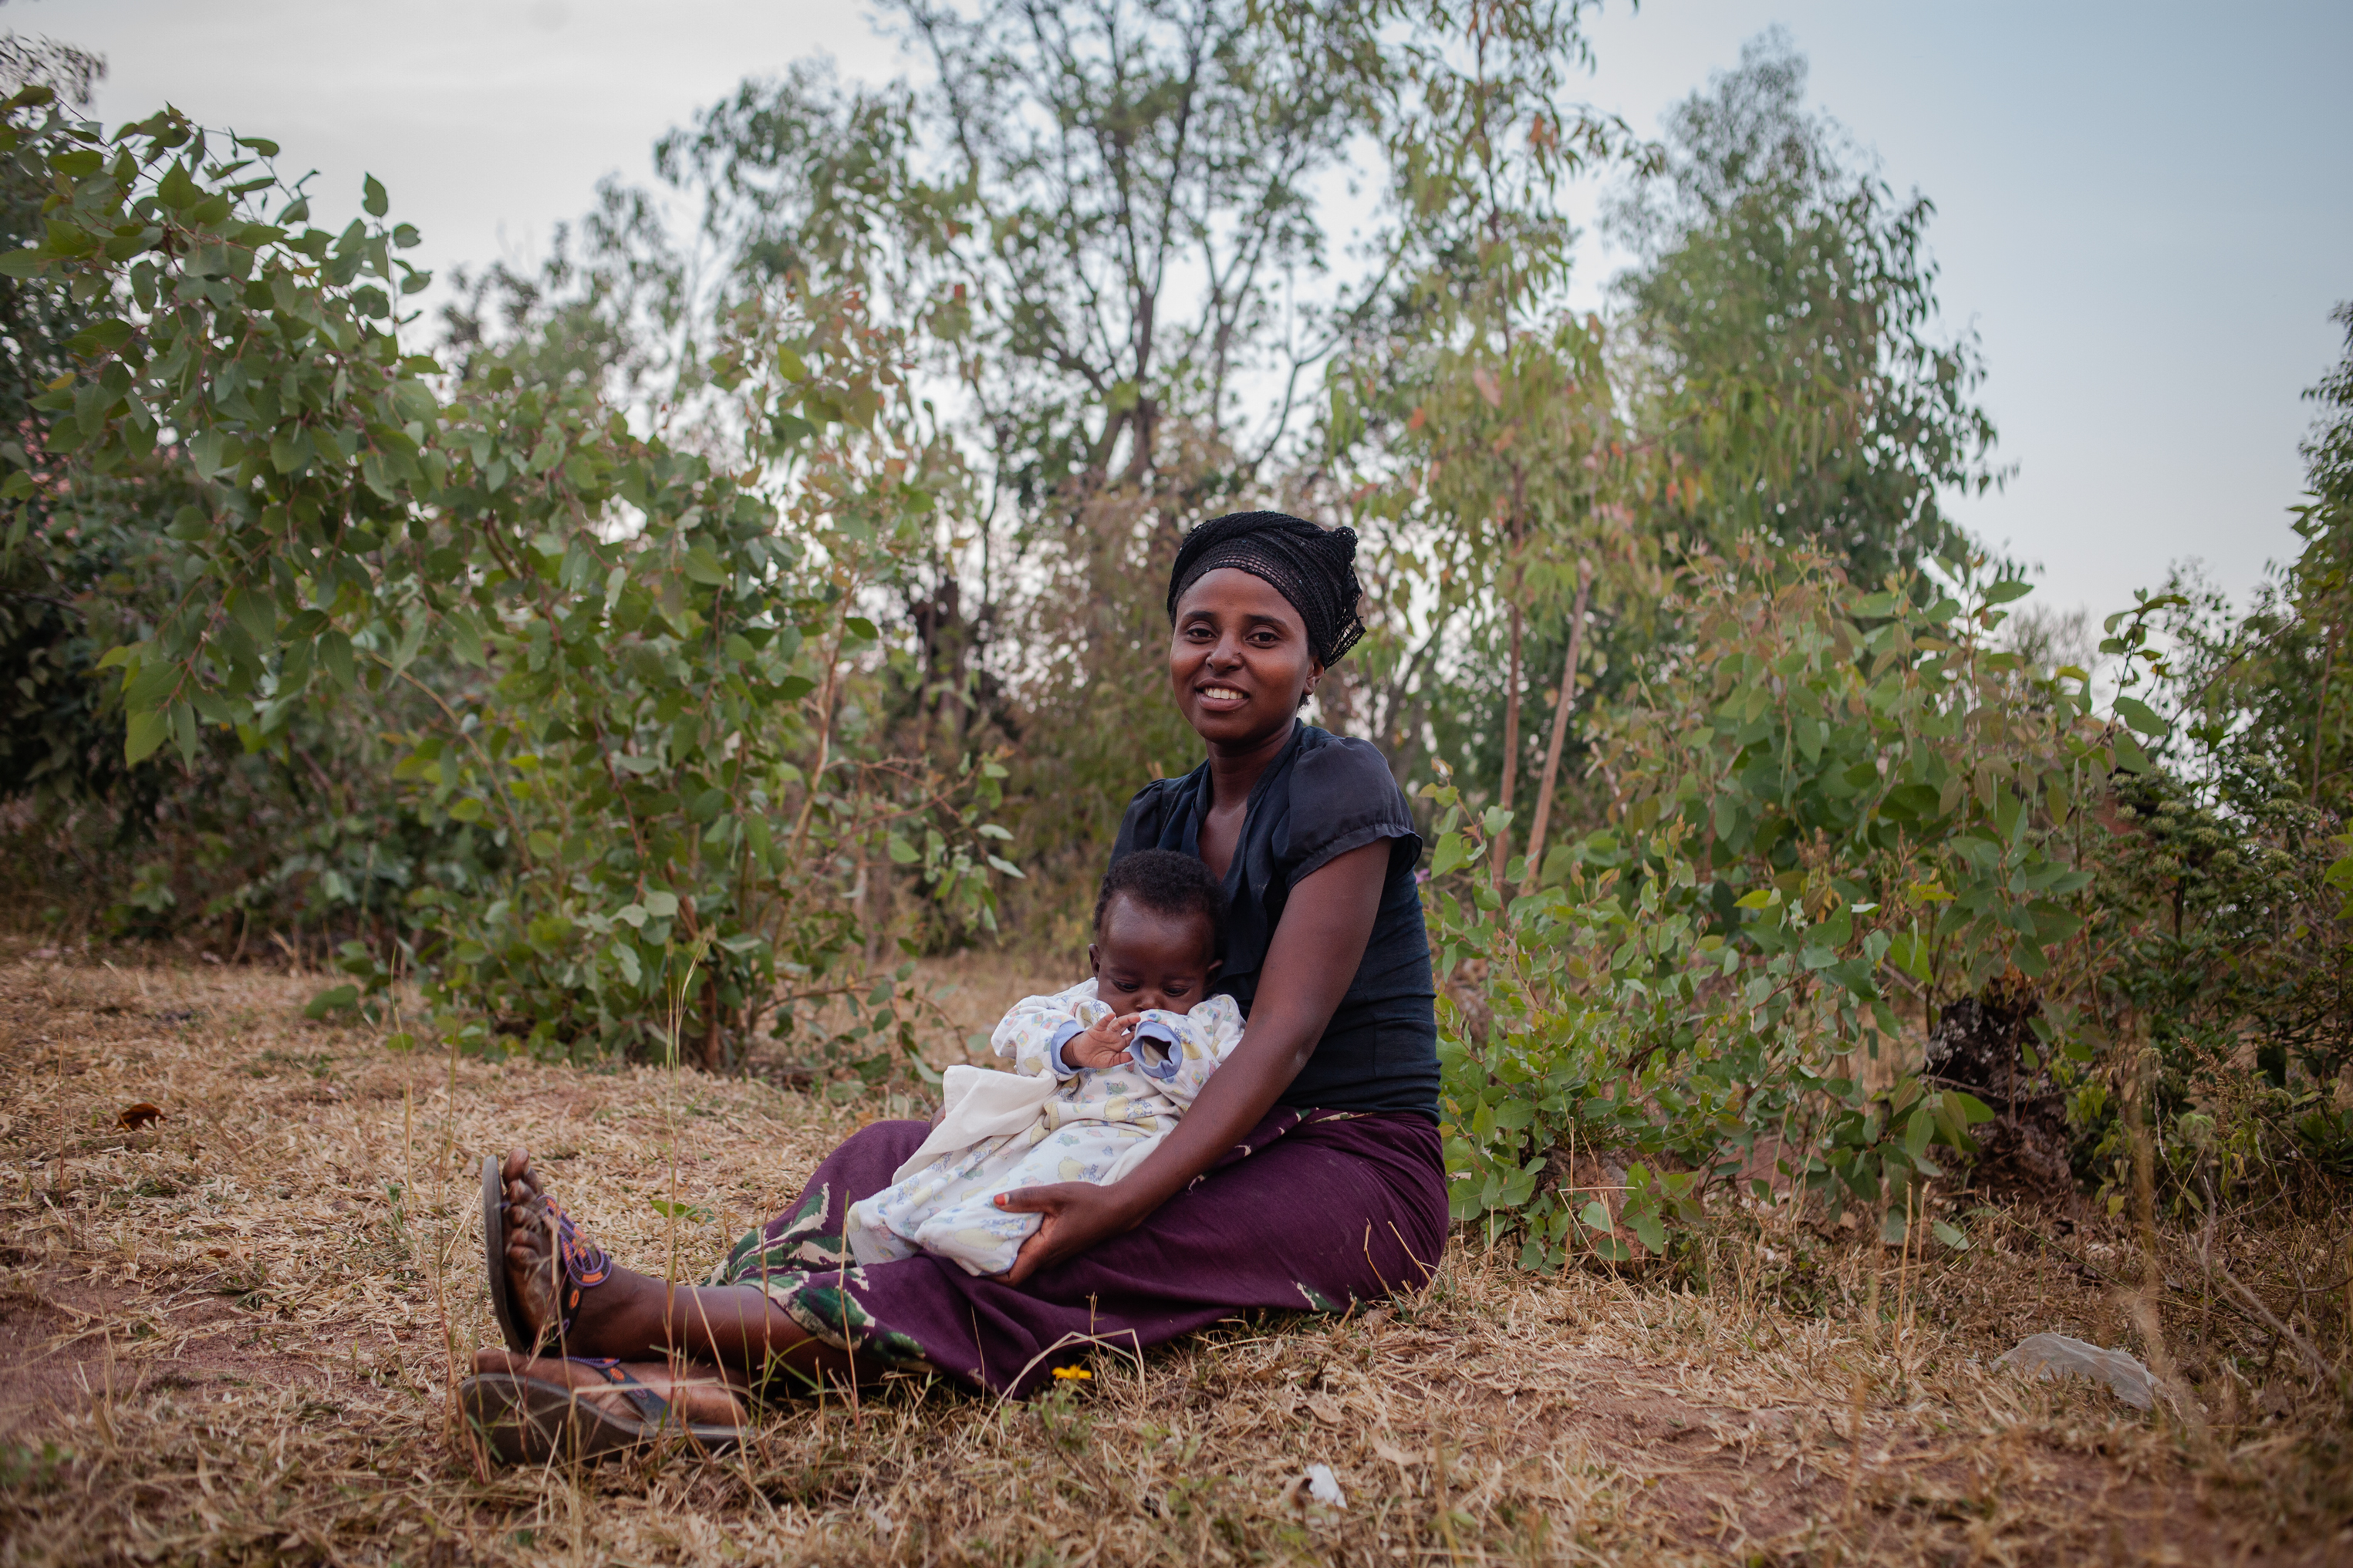 Claudine Ndashimye, 26, with her baby Rabertin. She received blood from Zipline after having complications with her pregnancy. (Esther Mbabazi for TIME)